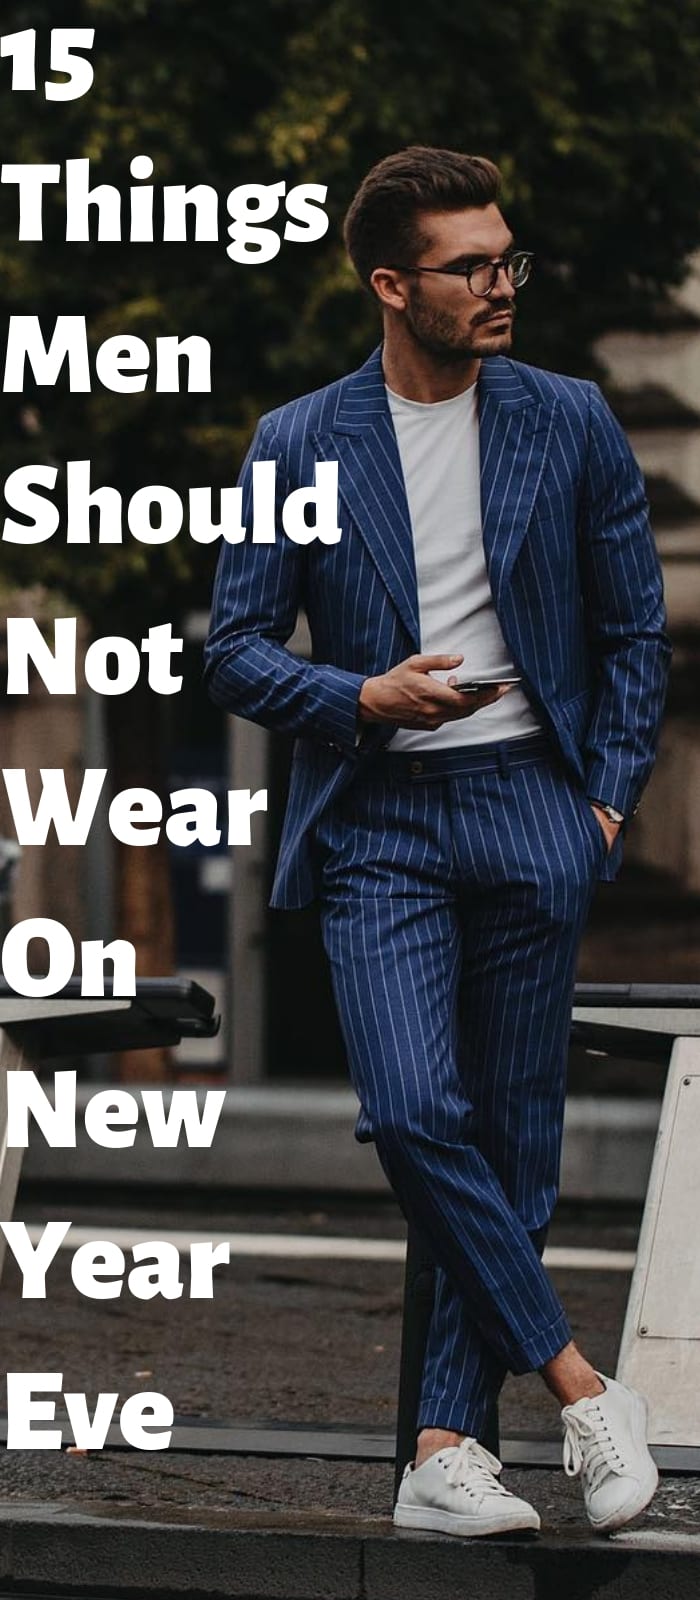 15 Things Men Should Not Wear For New Year Eve.